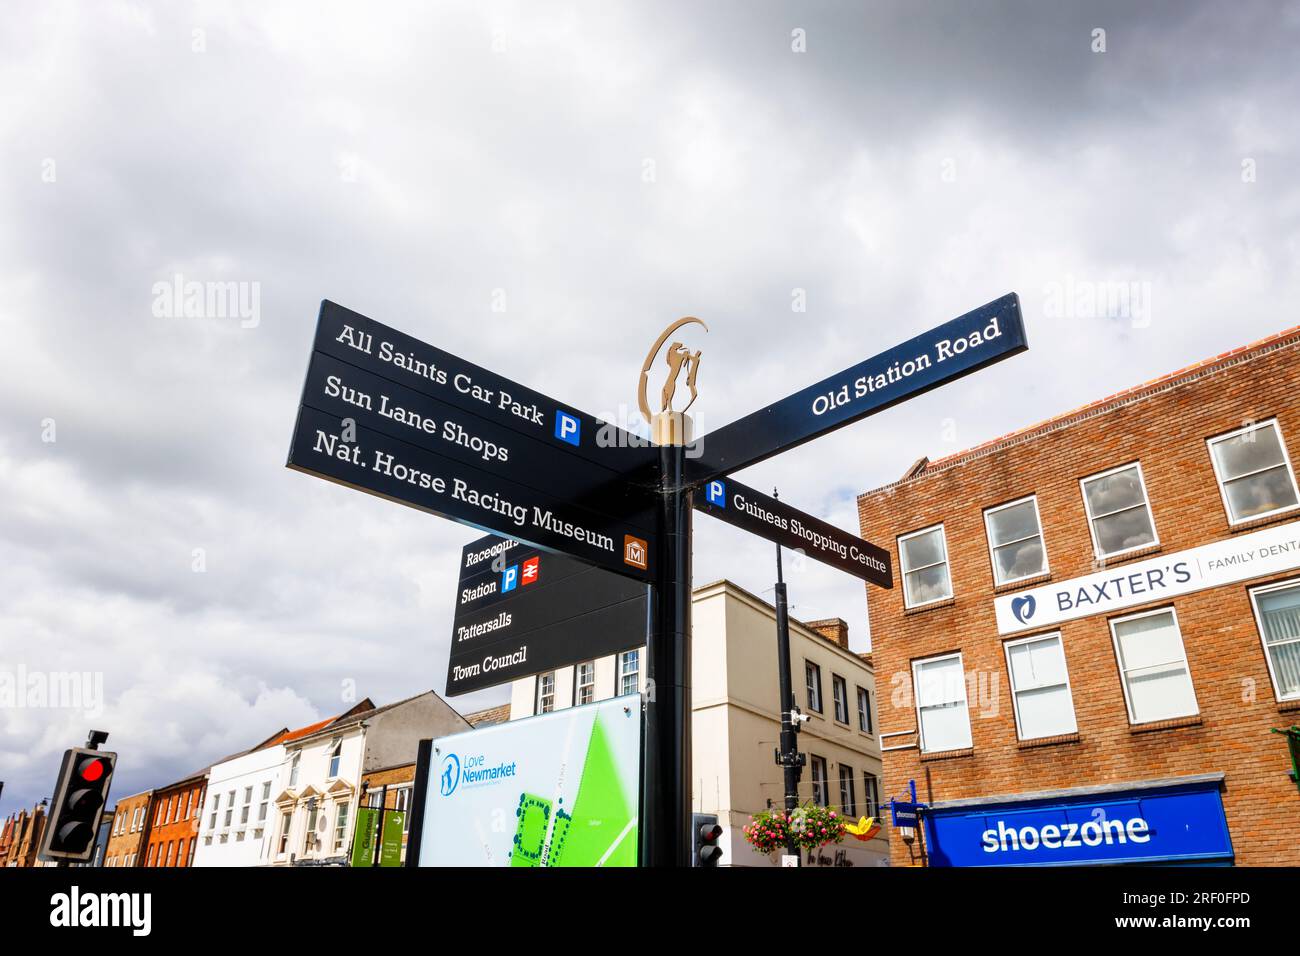 Street sign pointing to local points on interest in the town centre of Newmarket, a market town in the West Suffolk district of Suffolk, east England Stock Photo